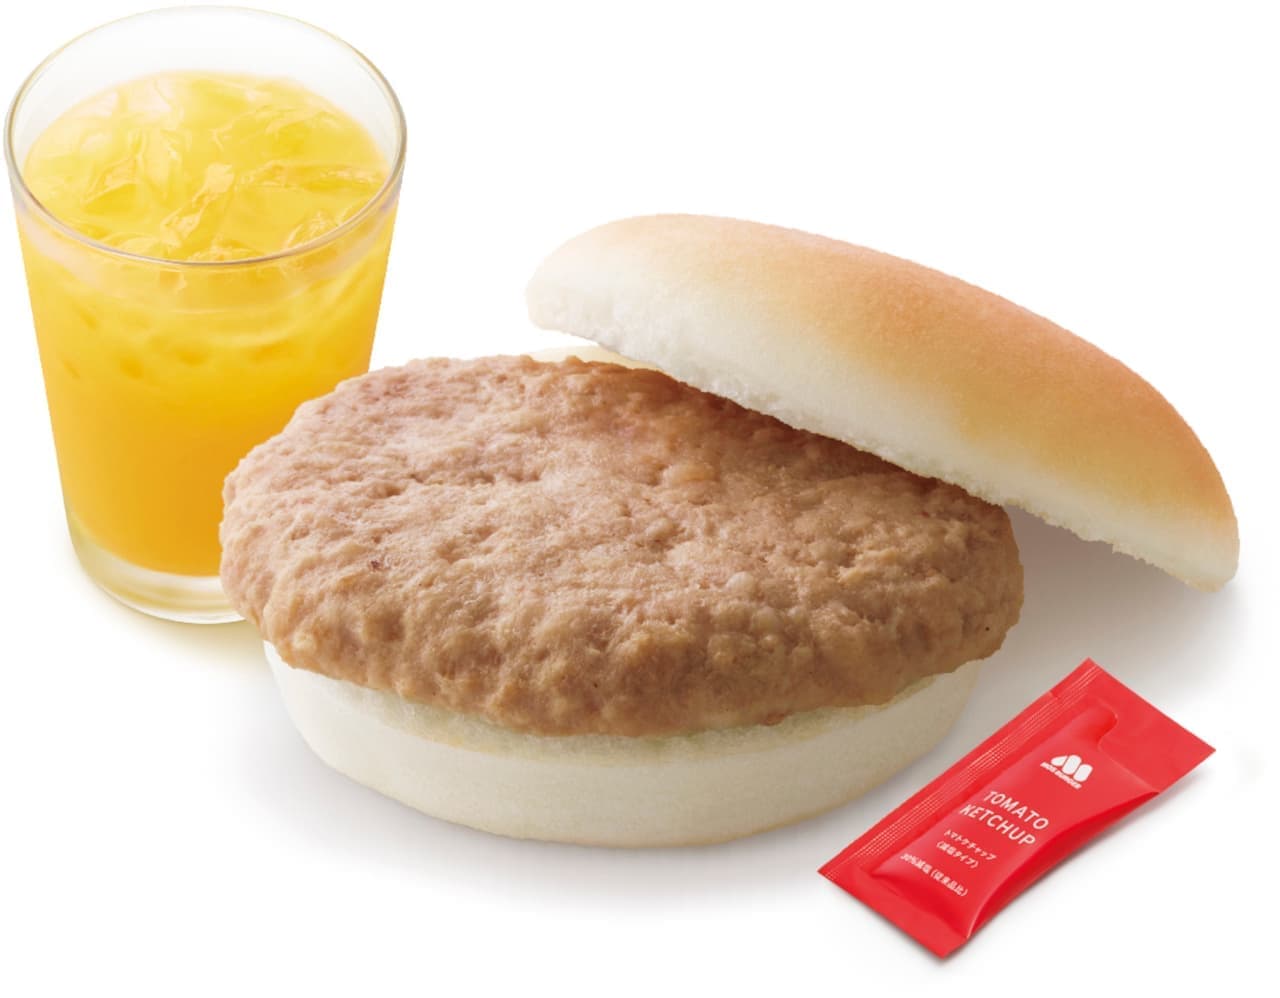 Mos Burger "Low Allergen Menu Set with Drink and Toy"